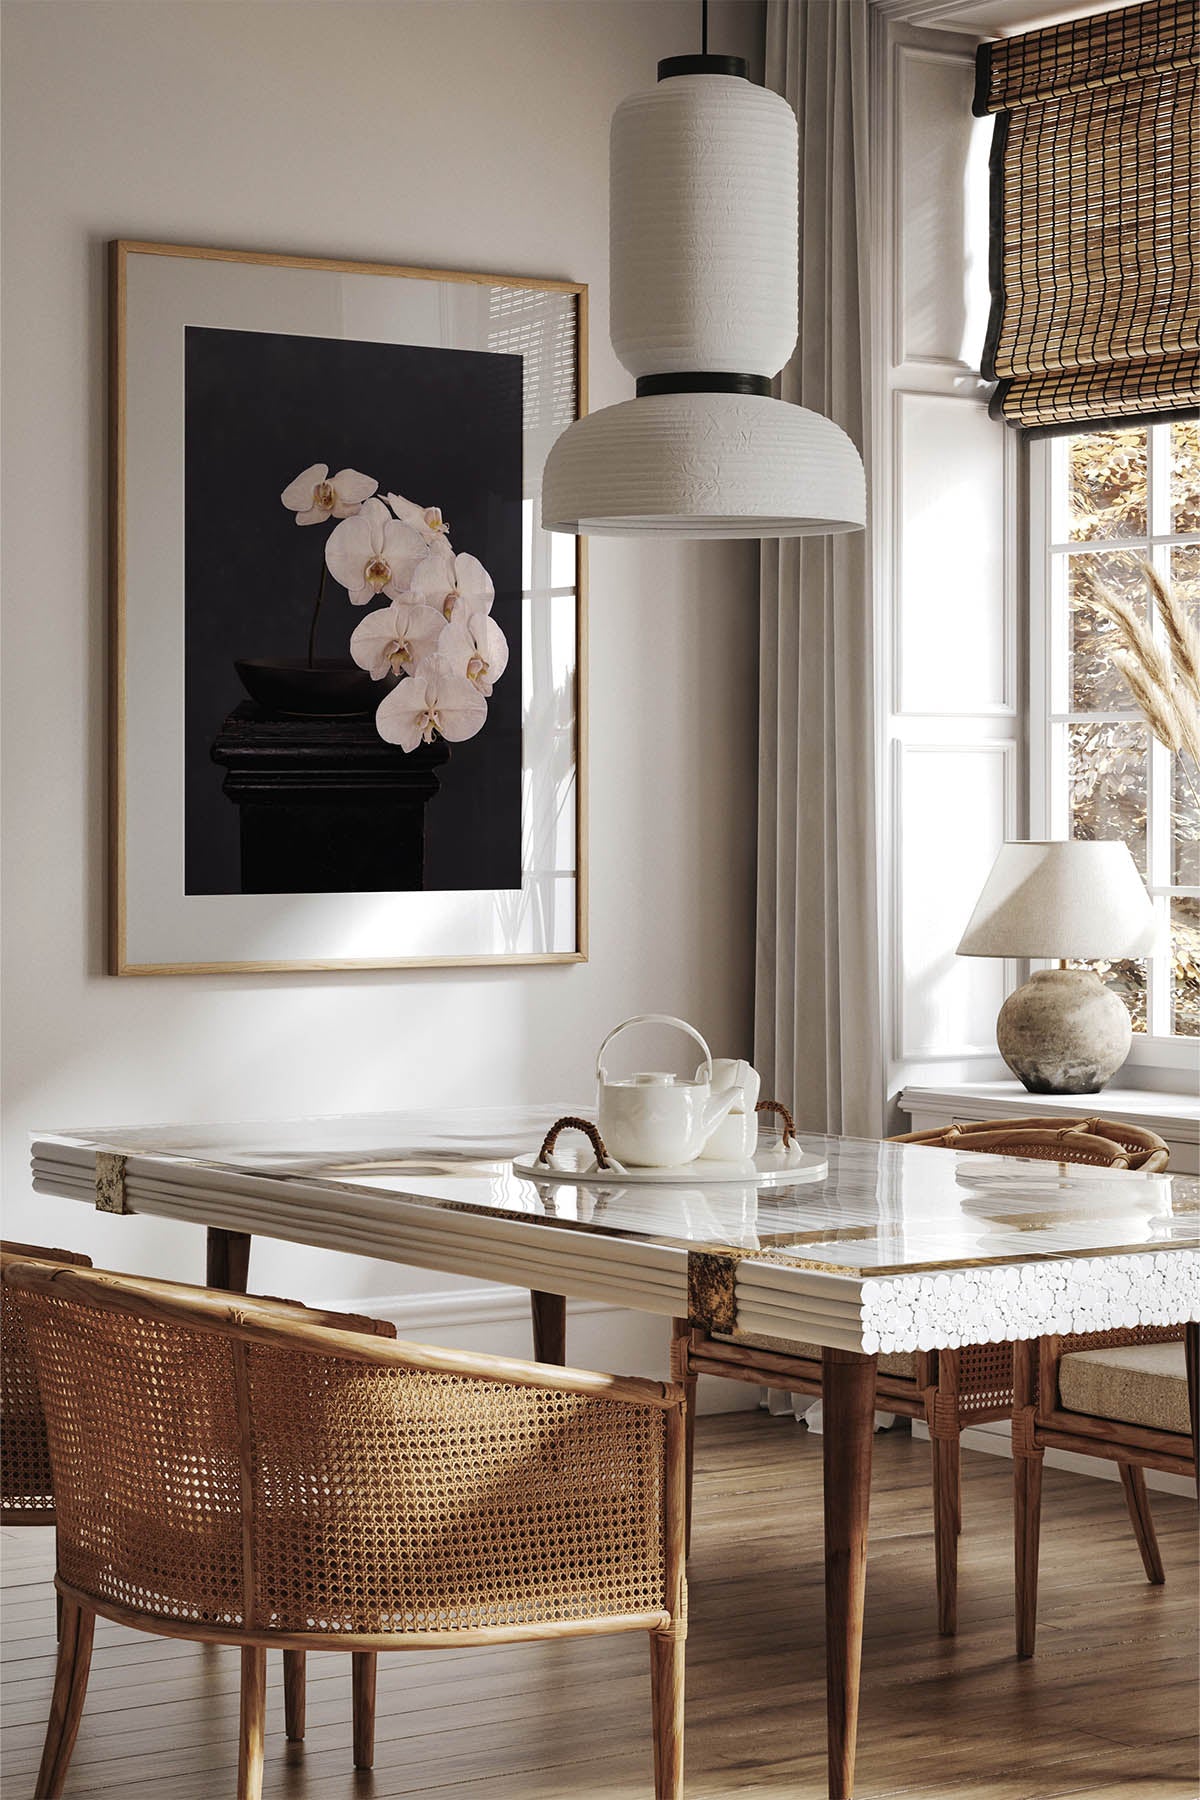 Fine Art Print Of A White Phaleanopsis Stem In A Black Bowl On A Black Mantle In A Classic Dining Room 